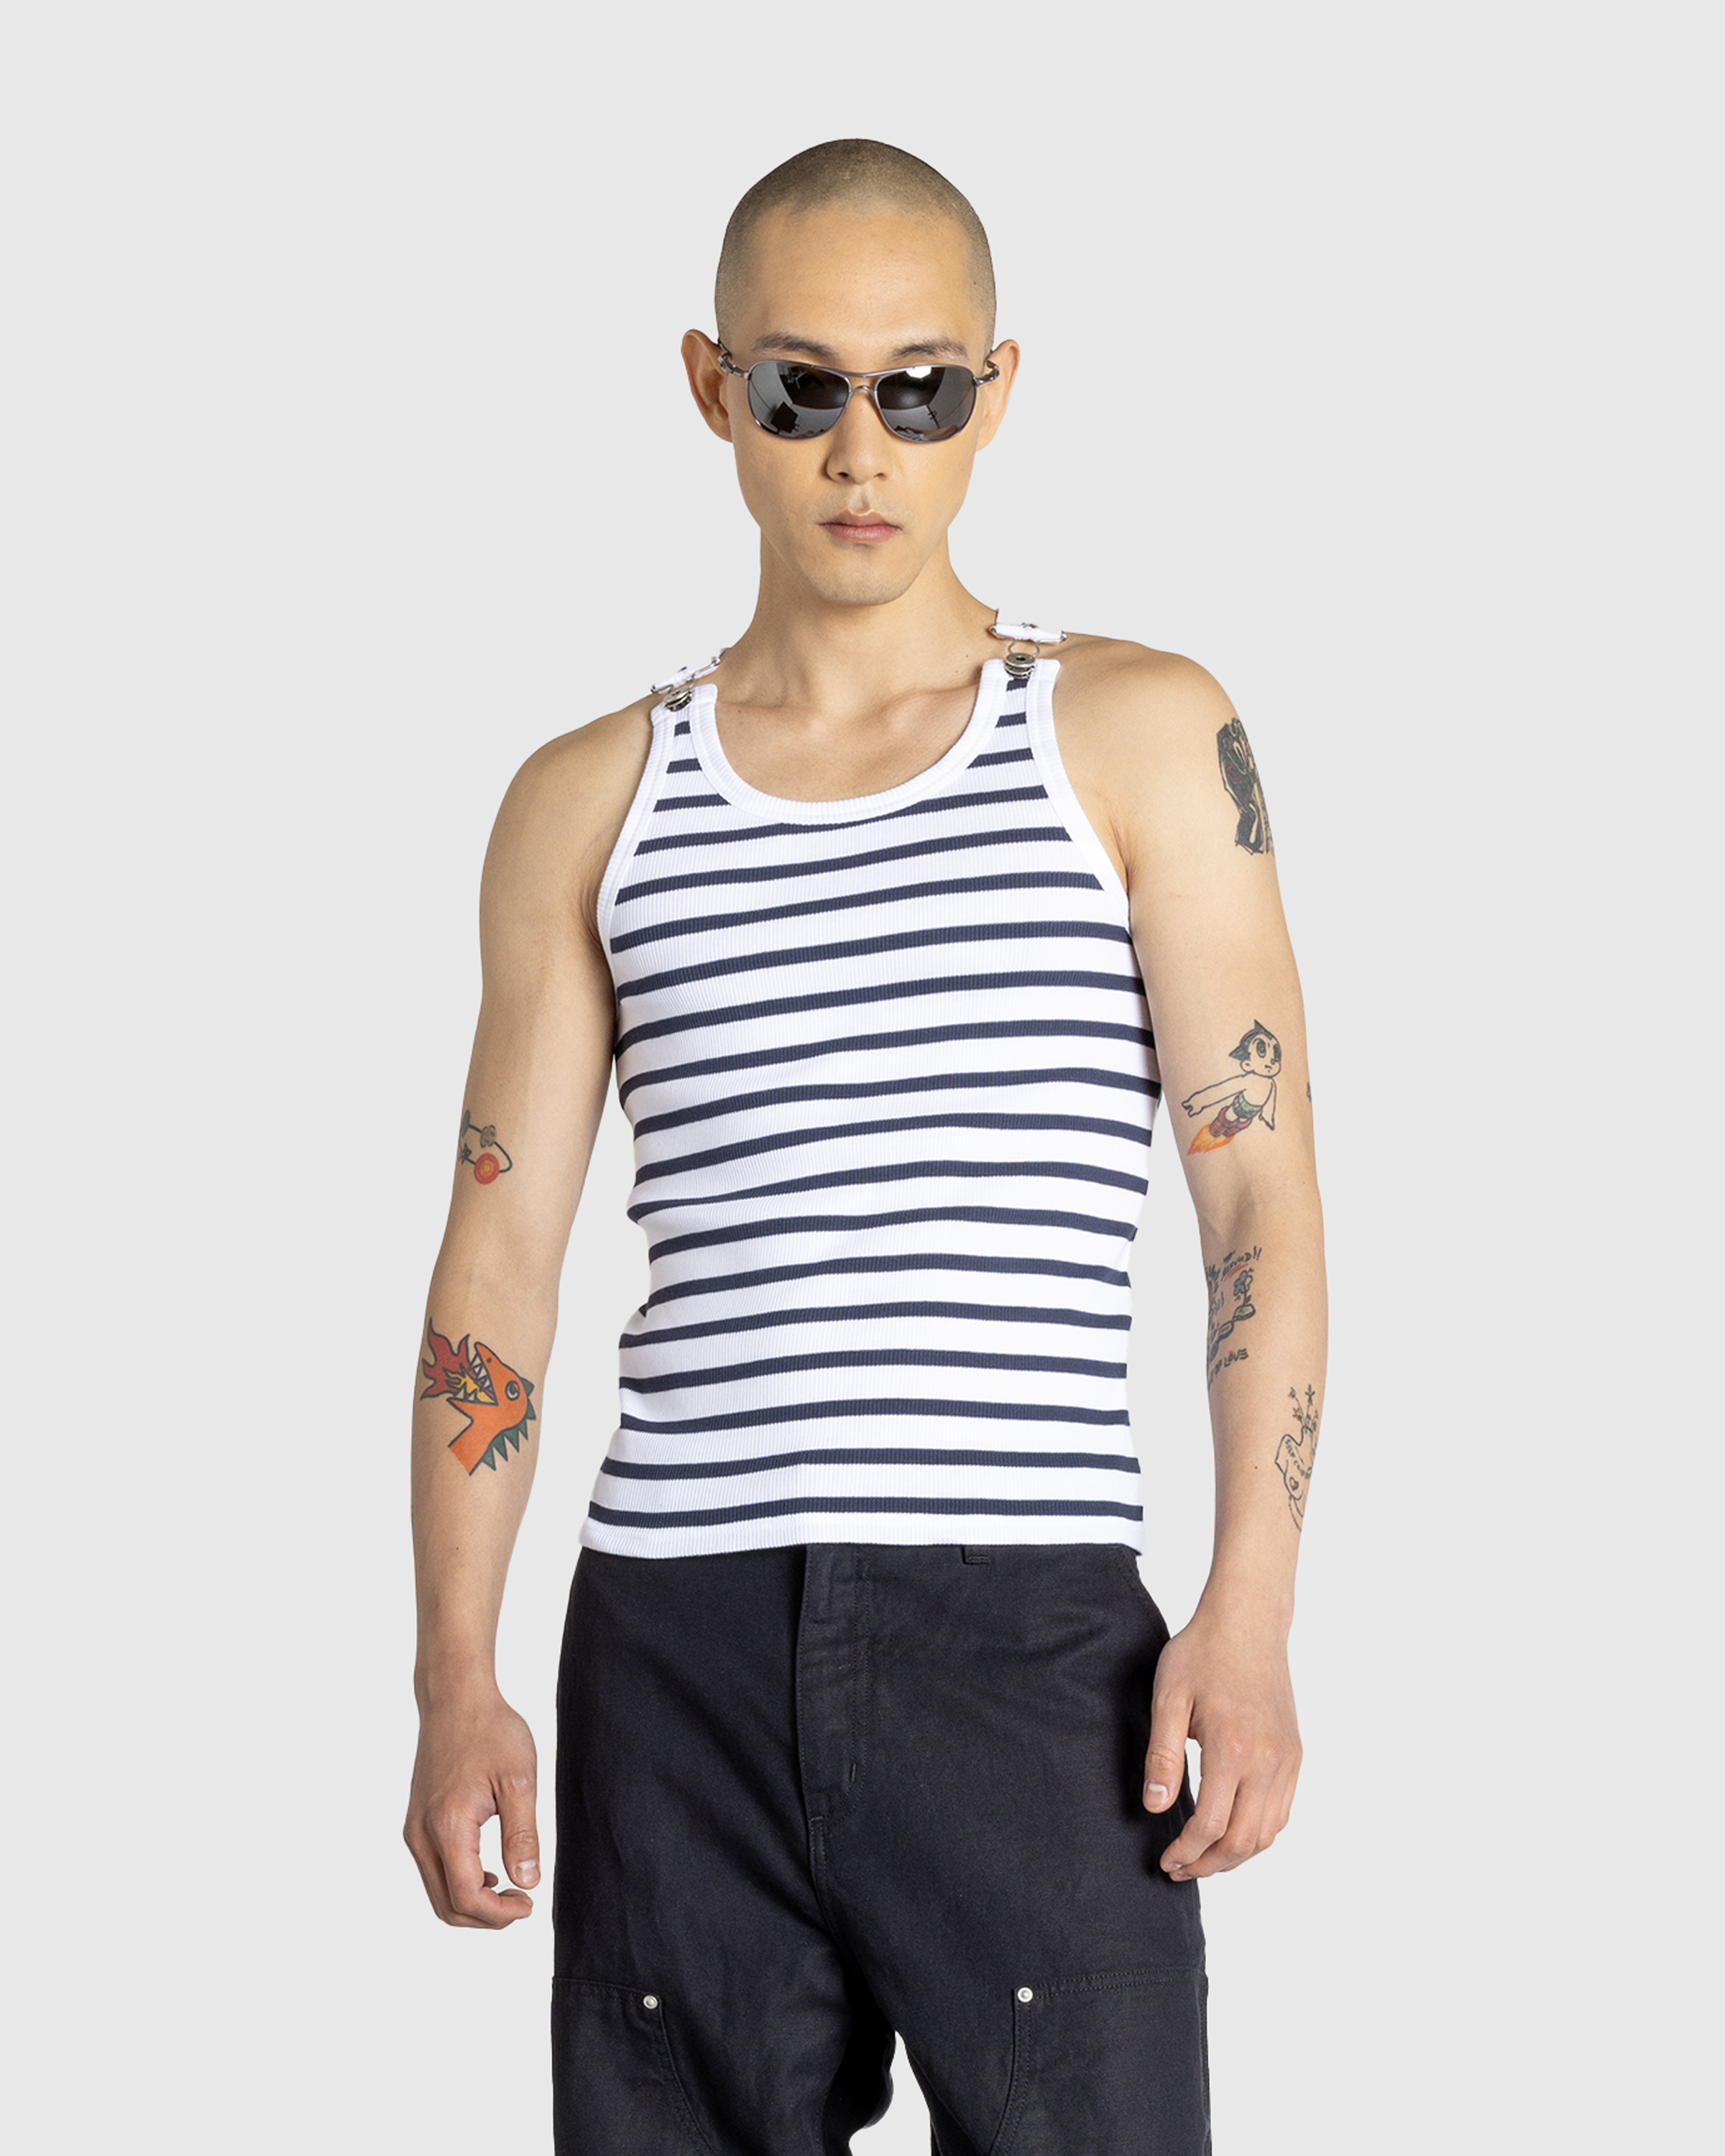 Jean Paul Gaultier – Ribbed Mariniere Tank Top White/Navy - Tank Tops - White - Image 2